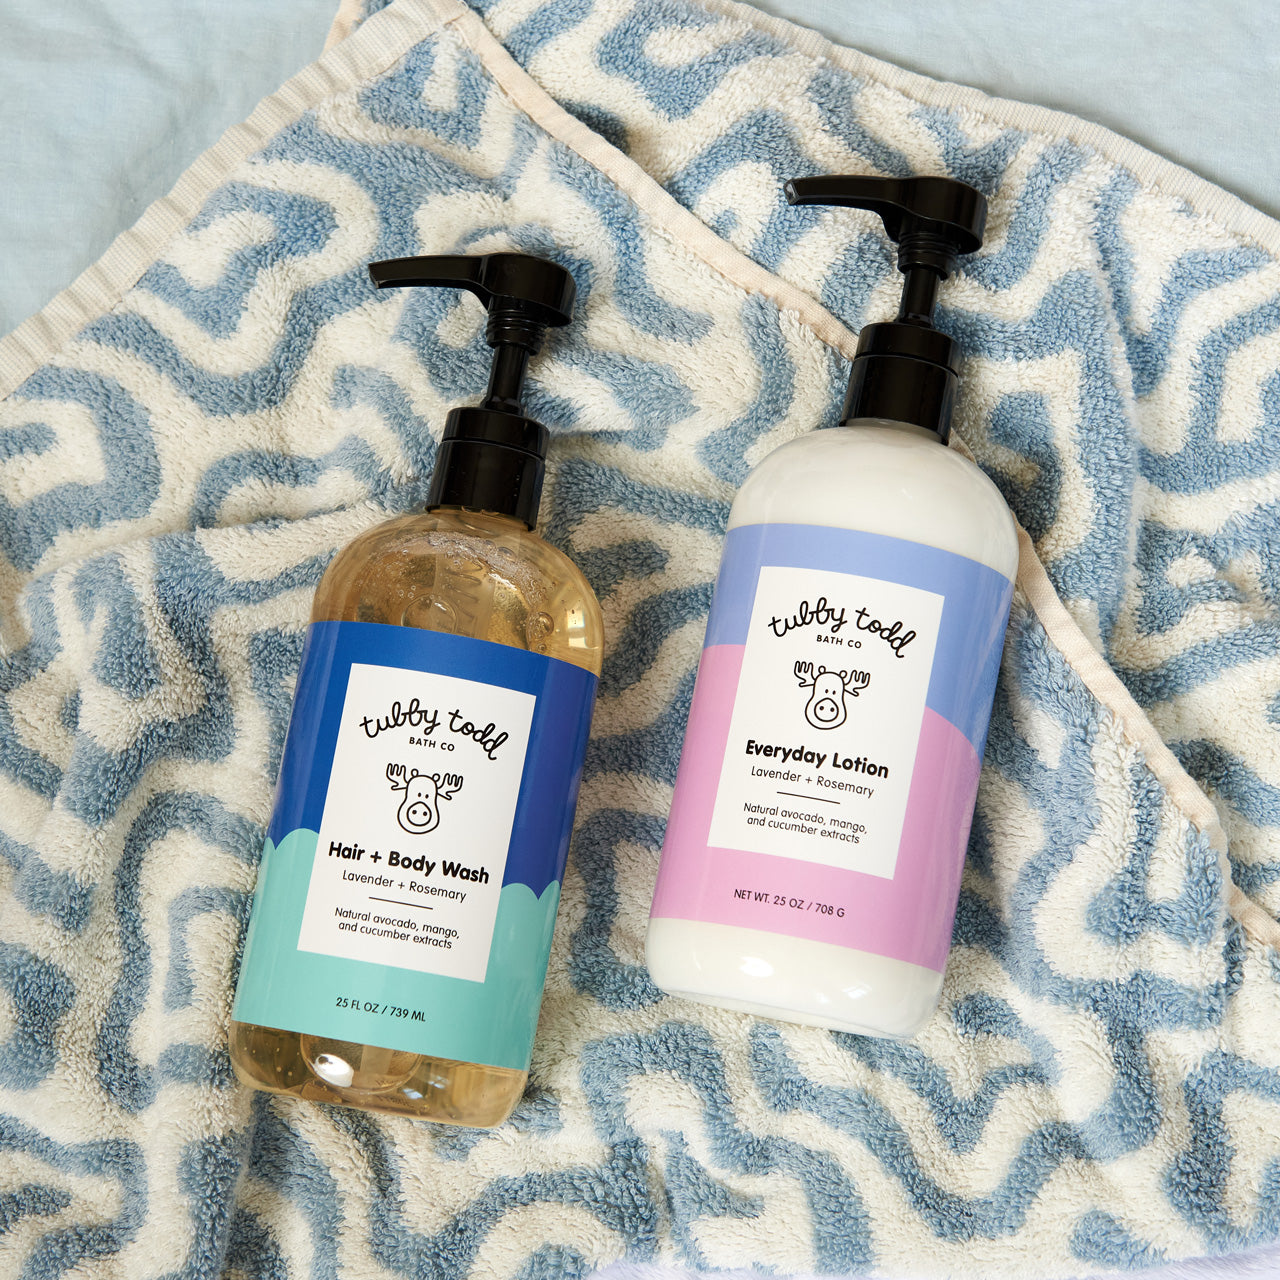 Hair + Body Wash and Everyday Lotion 25 oz bottles on blue and white towel